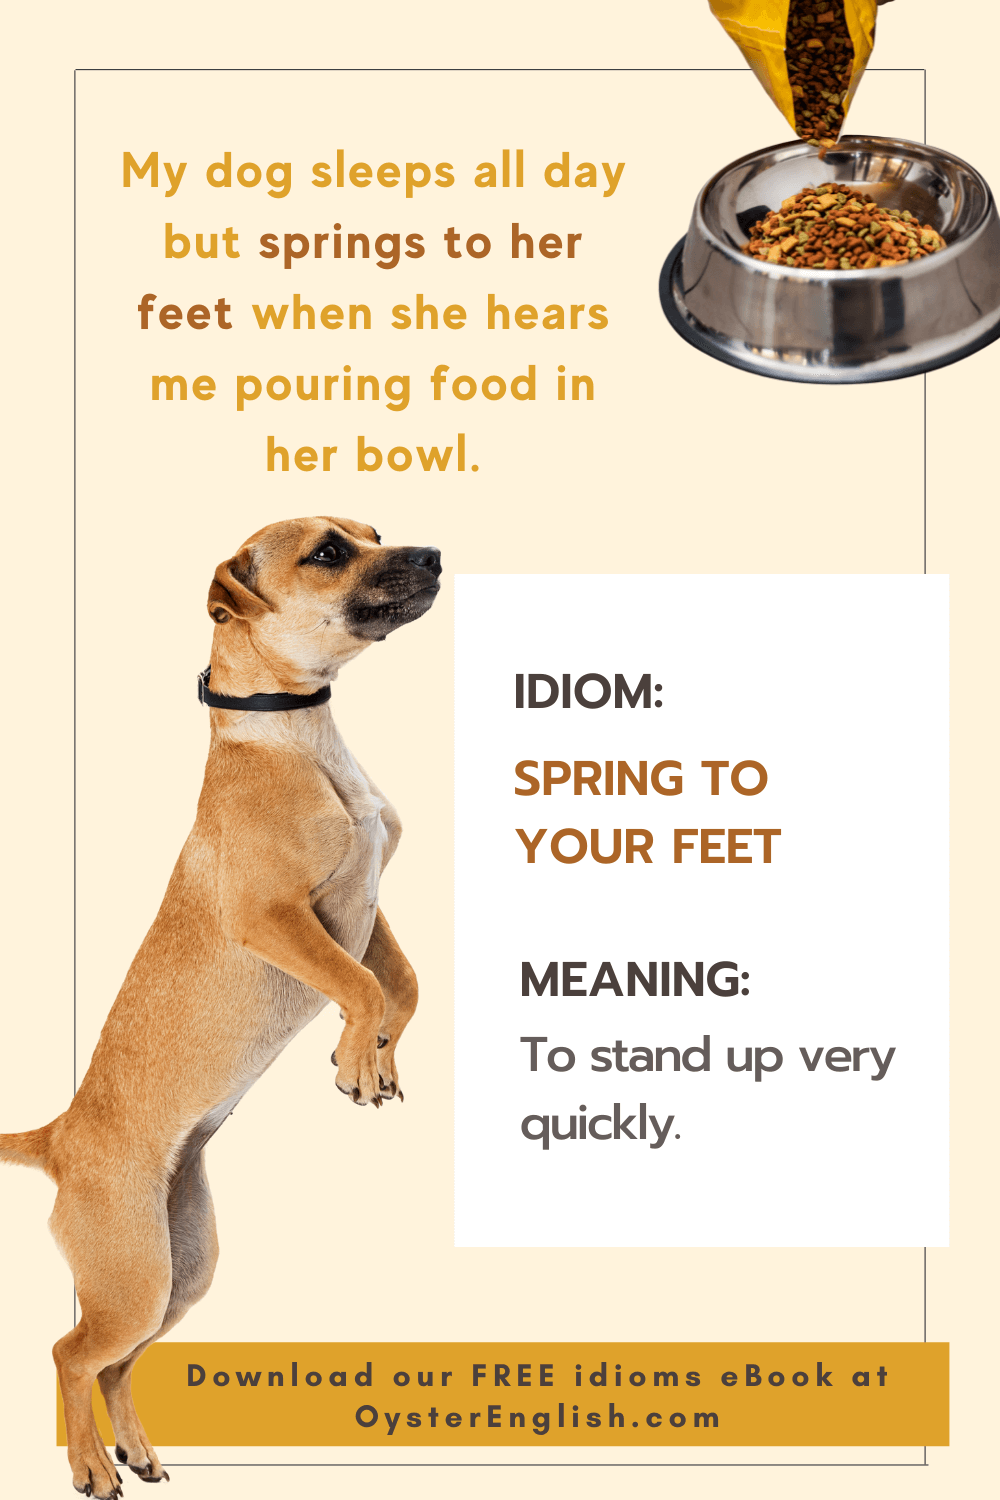 A dog stands up erect looking at food being poured in a bowl. "My dog sleeps all day but springs to her feet when she hears me pouring food in her bowl."